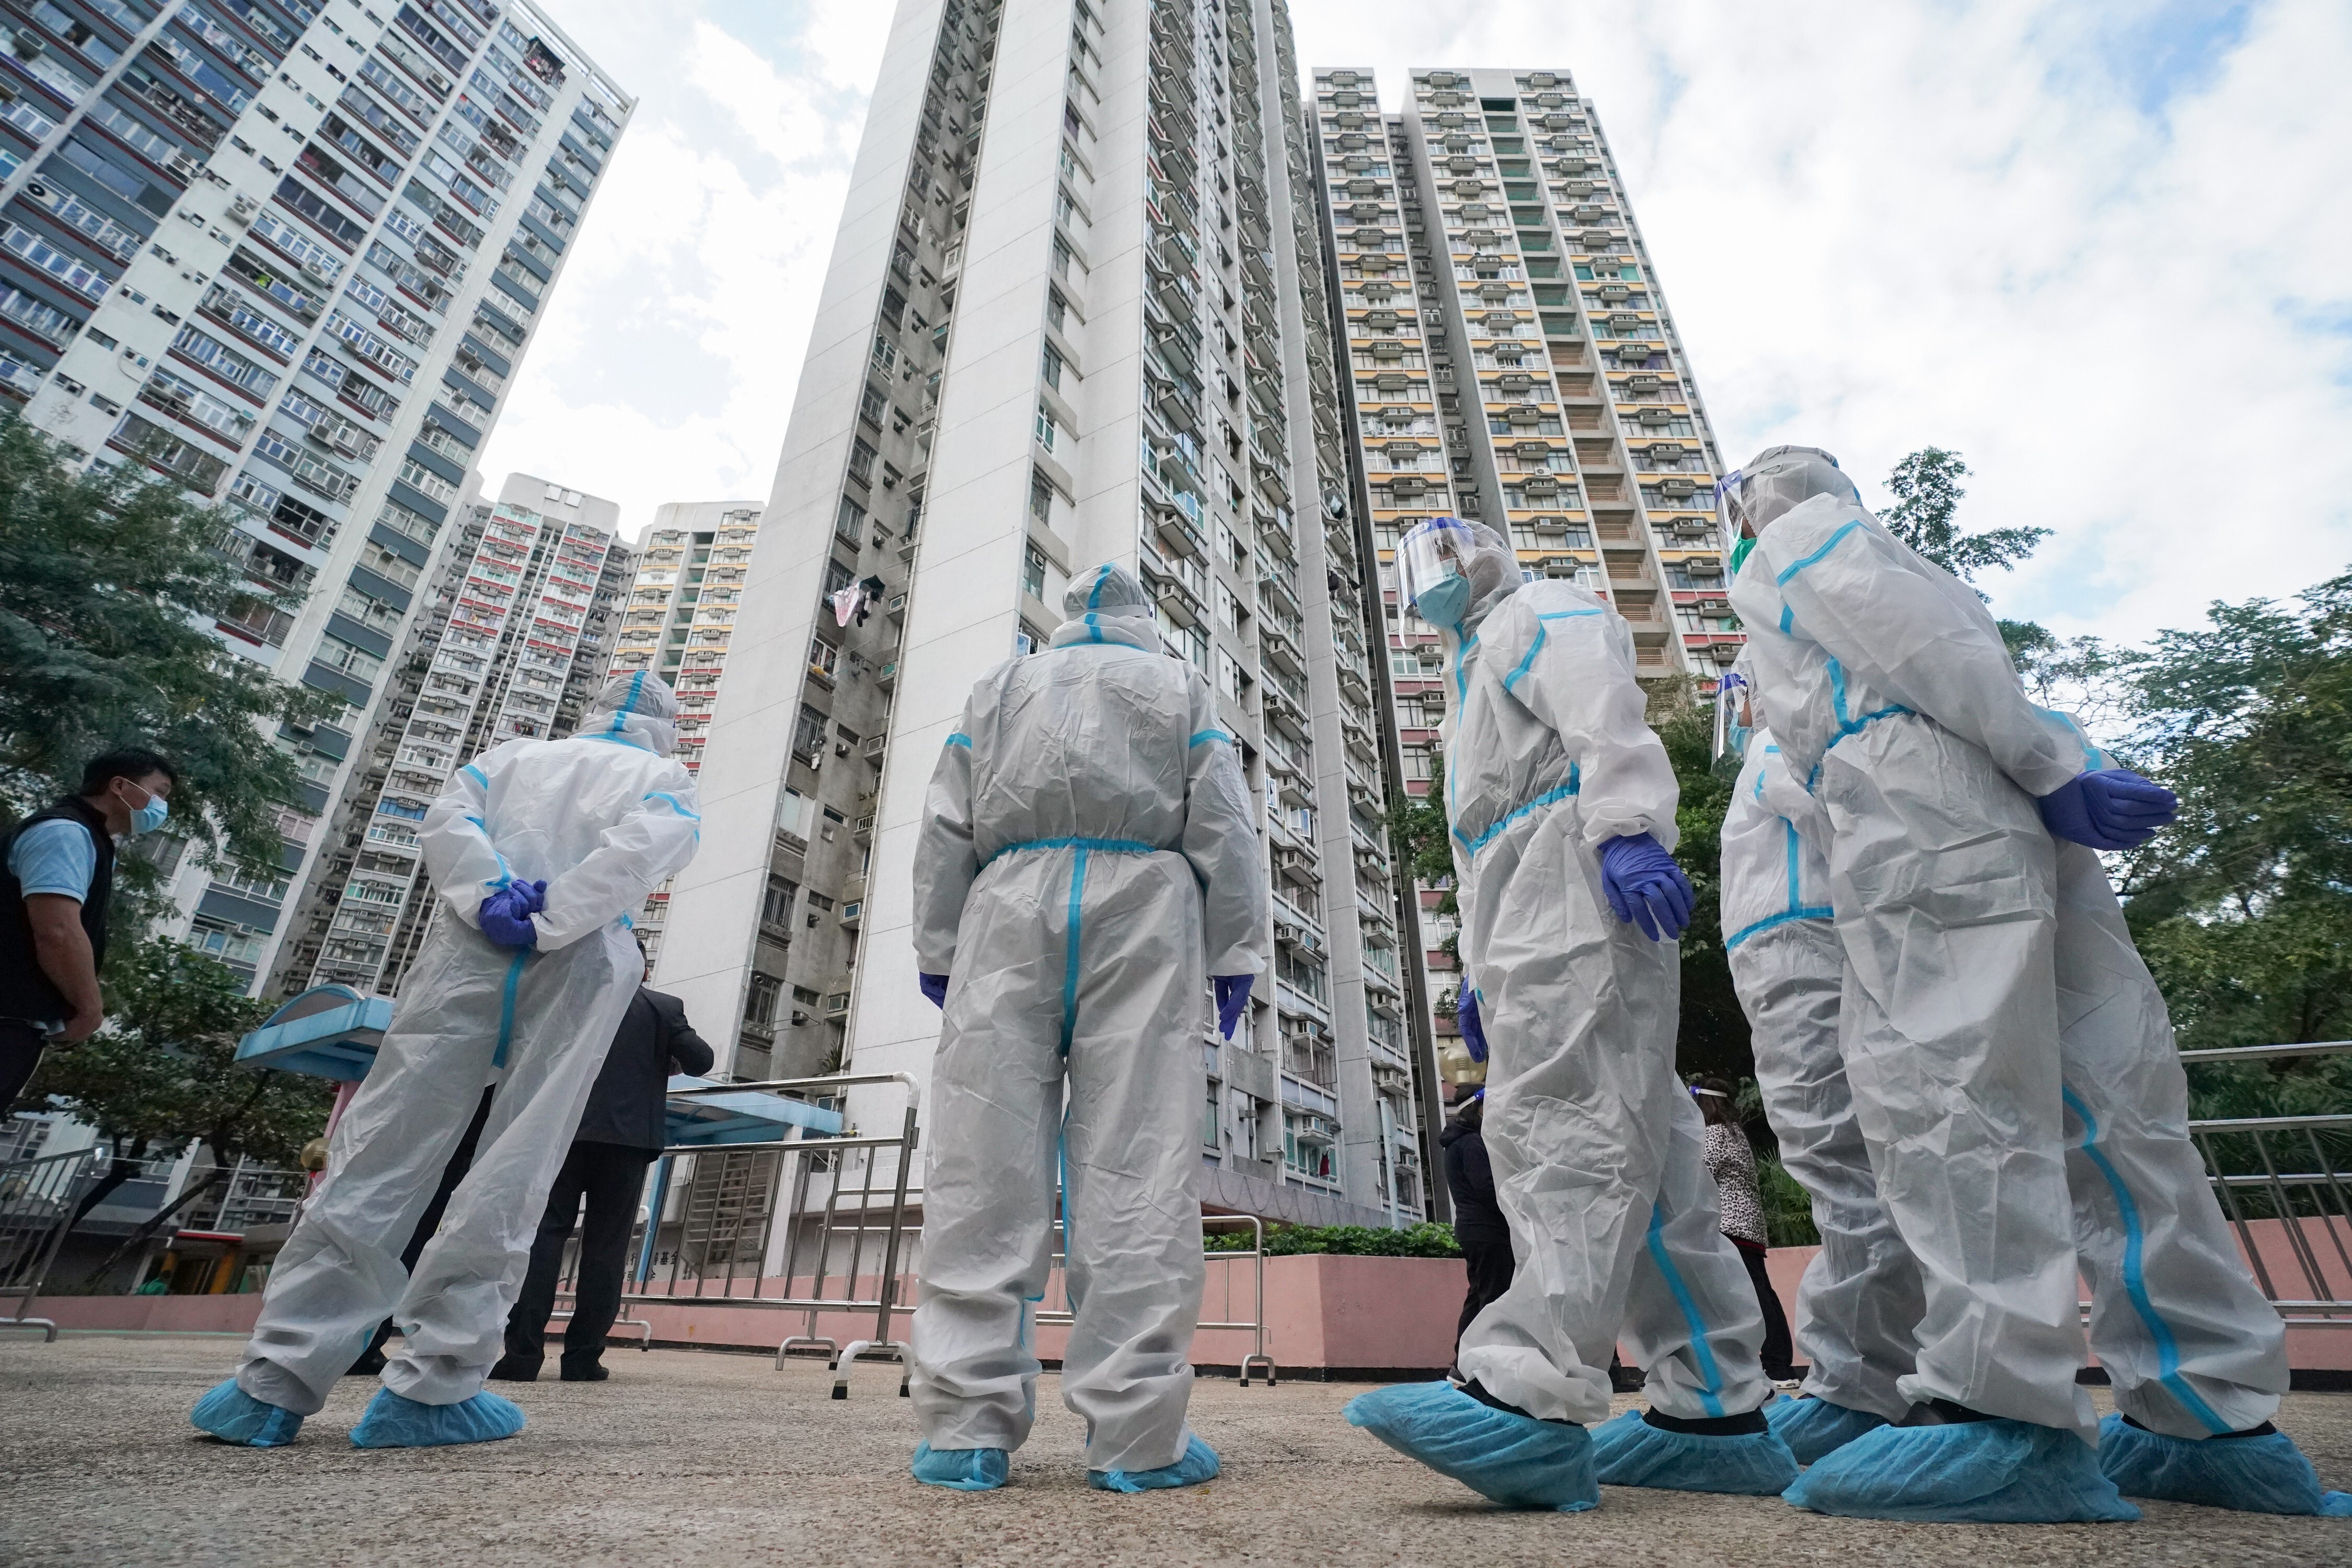 Tung Tau Estate in Wong Tai Sin was among the sites where coronavirus cases were detected. Photo: Felix Wong